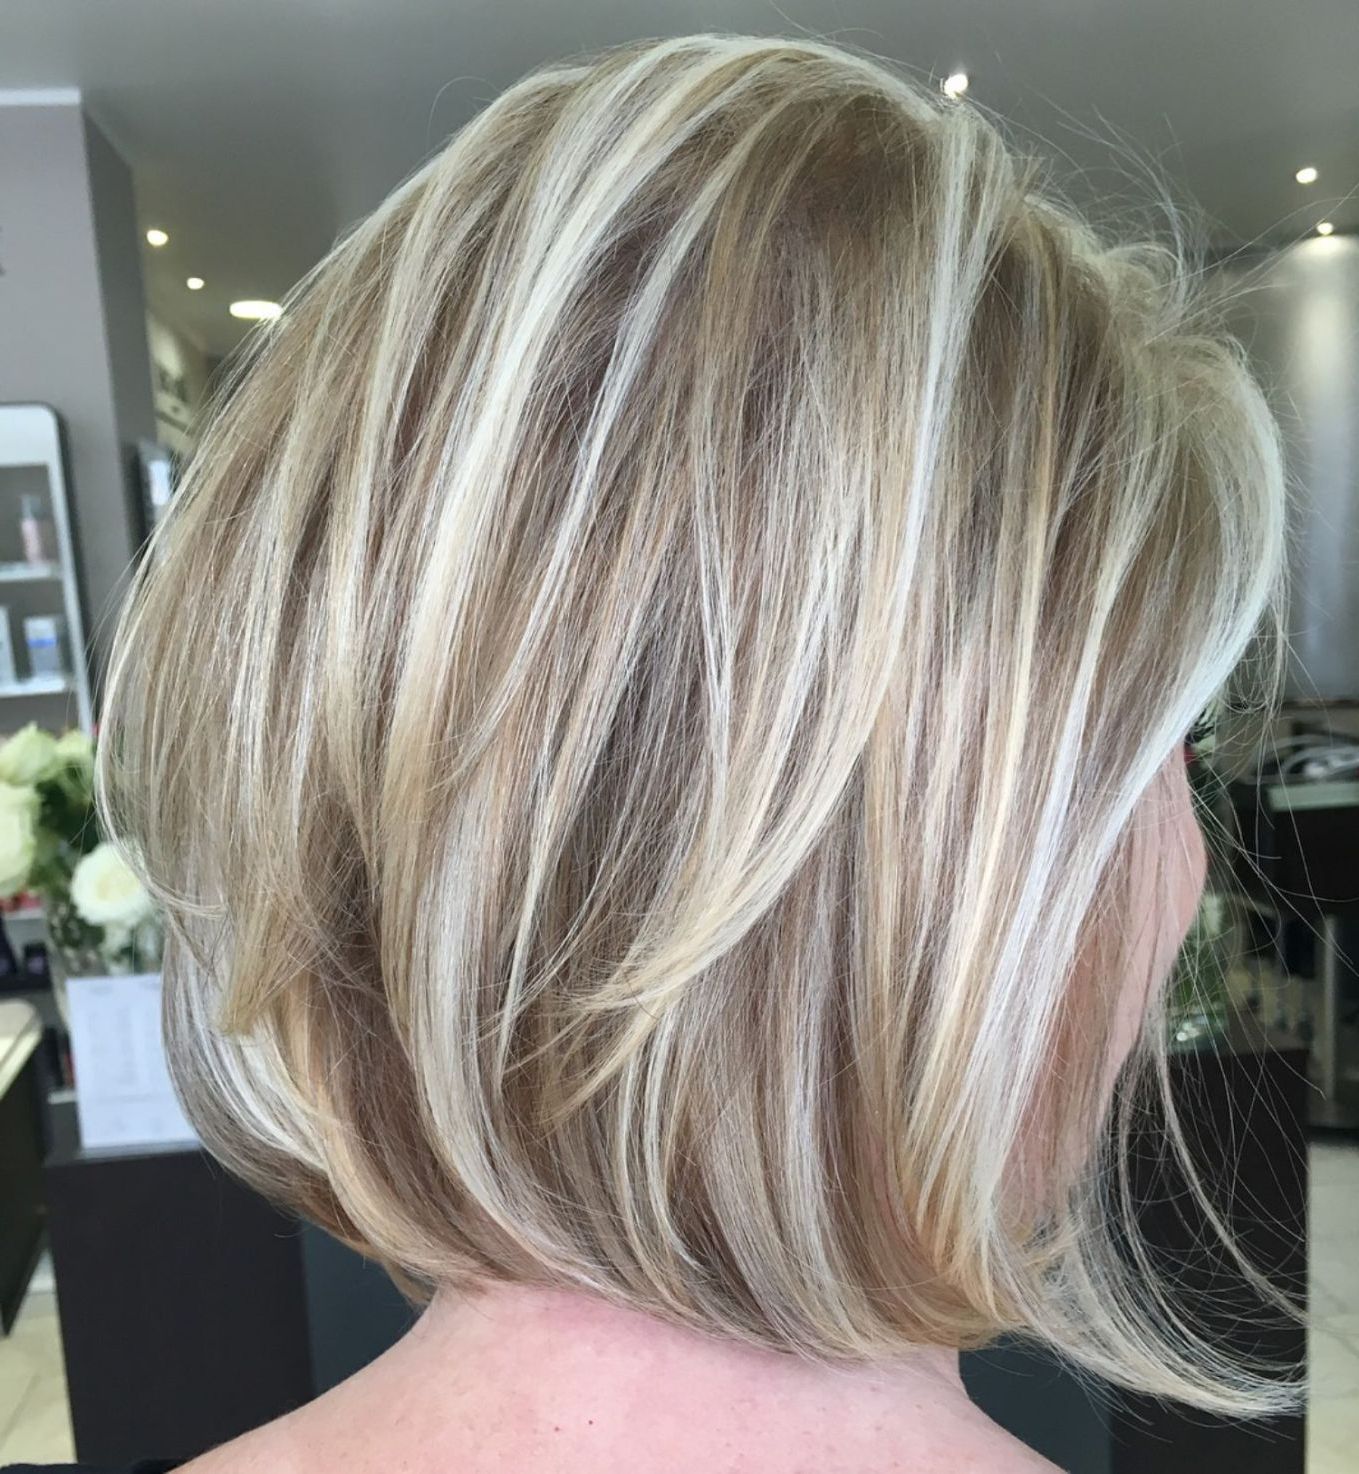 60 Layered Bob Styles: Modern Haircuts With Layers For Any Occasion With Regard To Layered Balayage Bob Hairstyles (View 19 of 20)